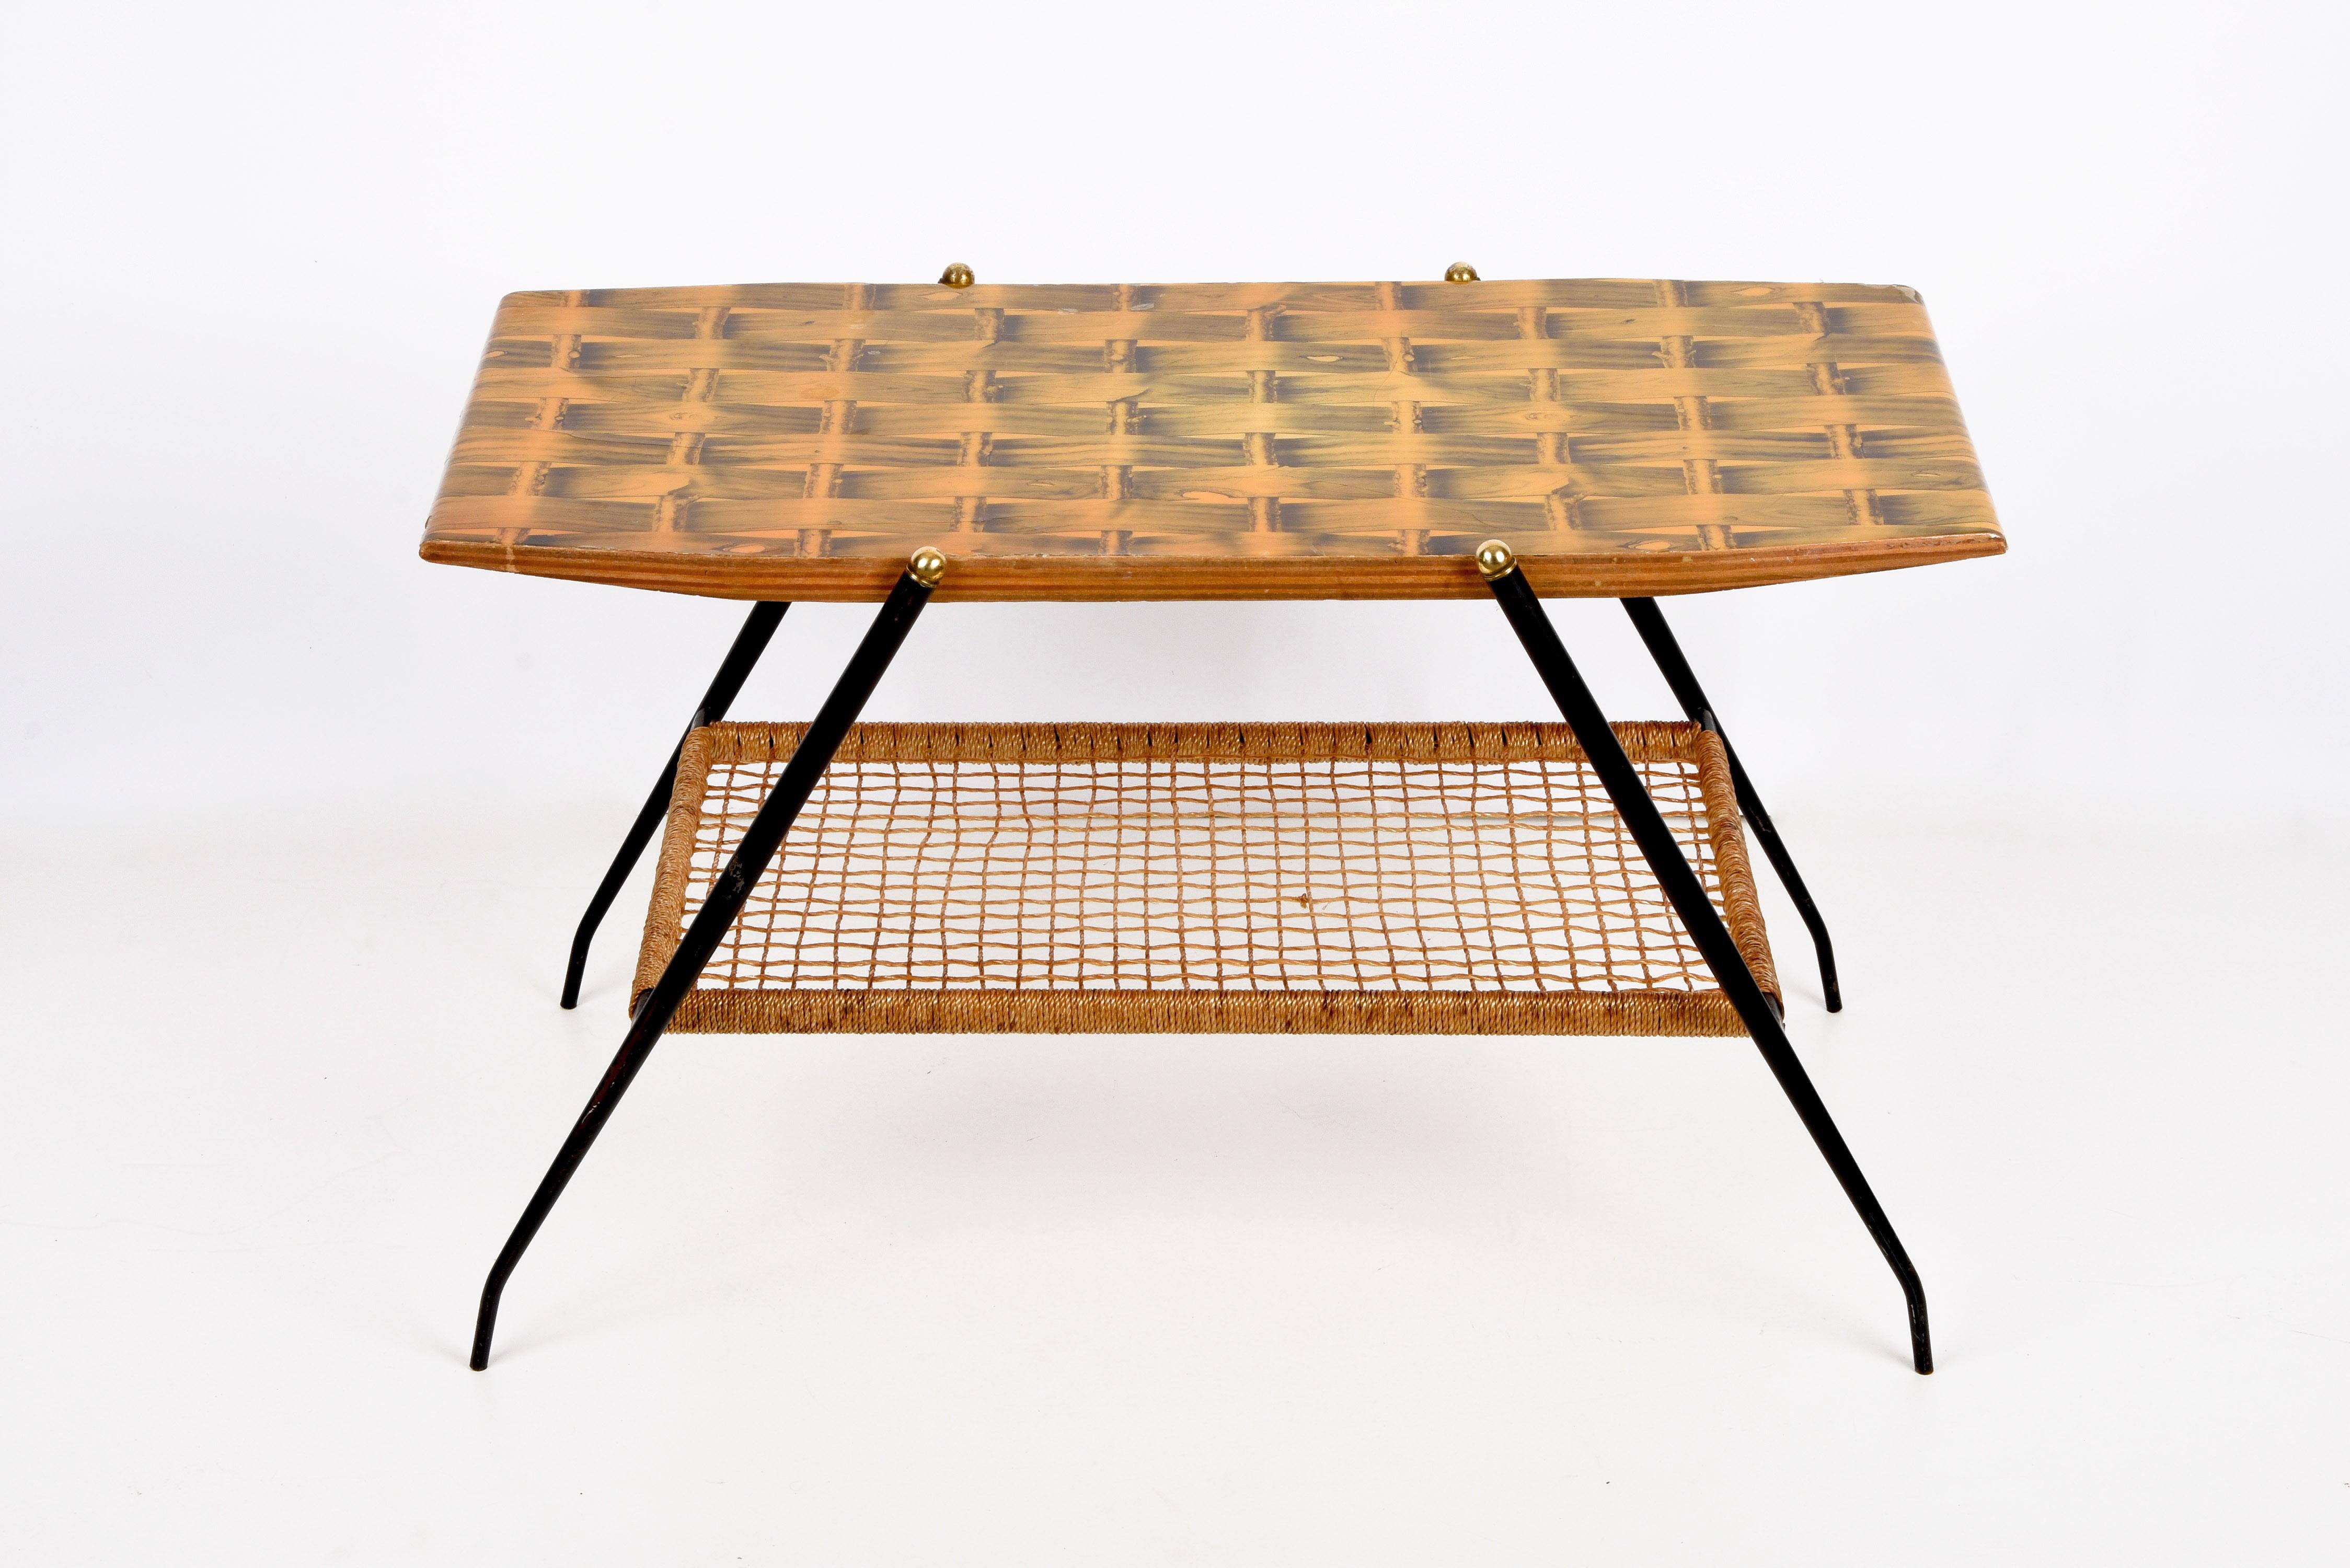 Marvellous midcentury coffee table in wood, brass and black metal. This table was produced in Italy during the 1950s.

It is a rare and elegant wooden coffee table with glazed braided print, it has black metal legs with a wonderful nylon magazine